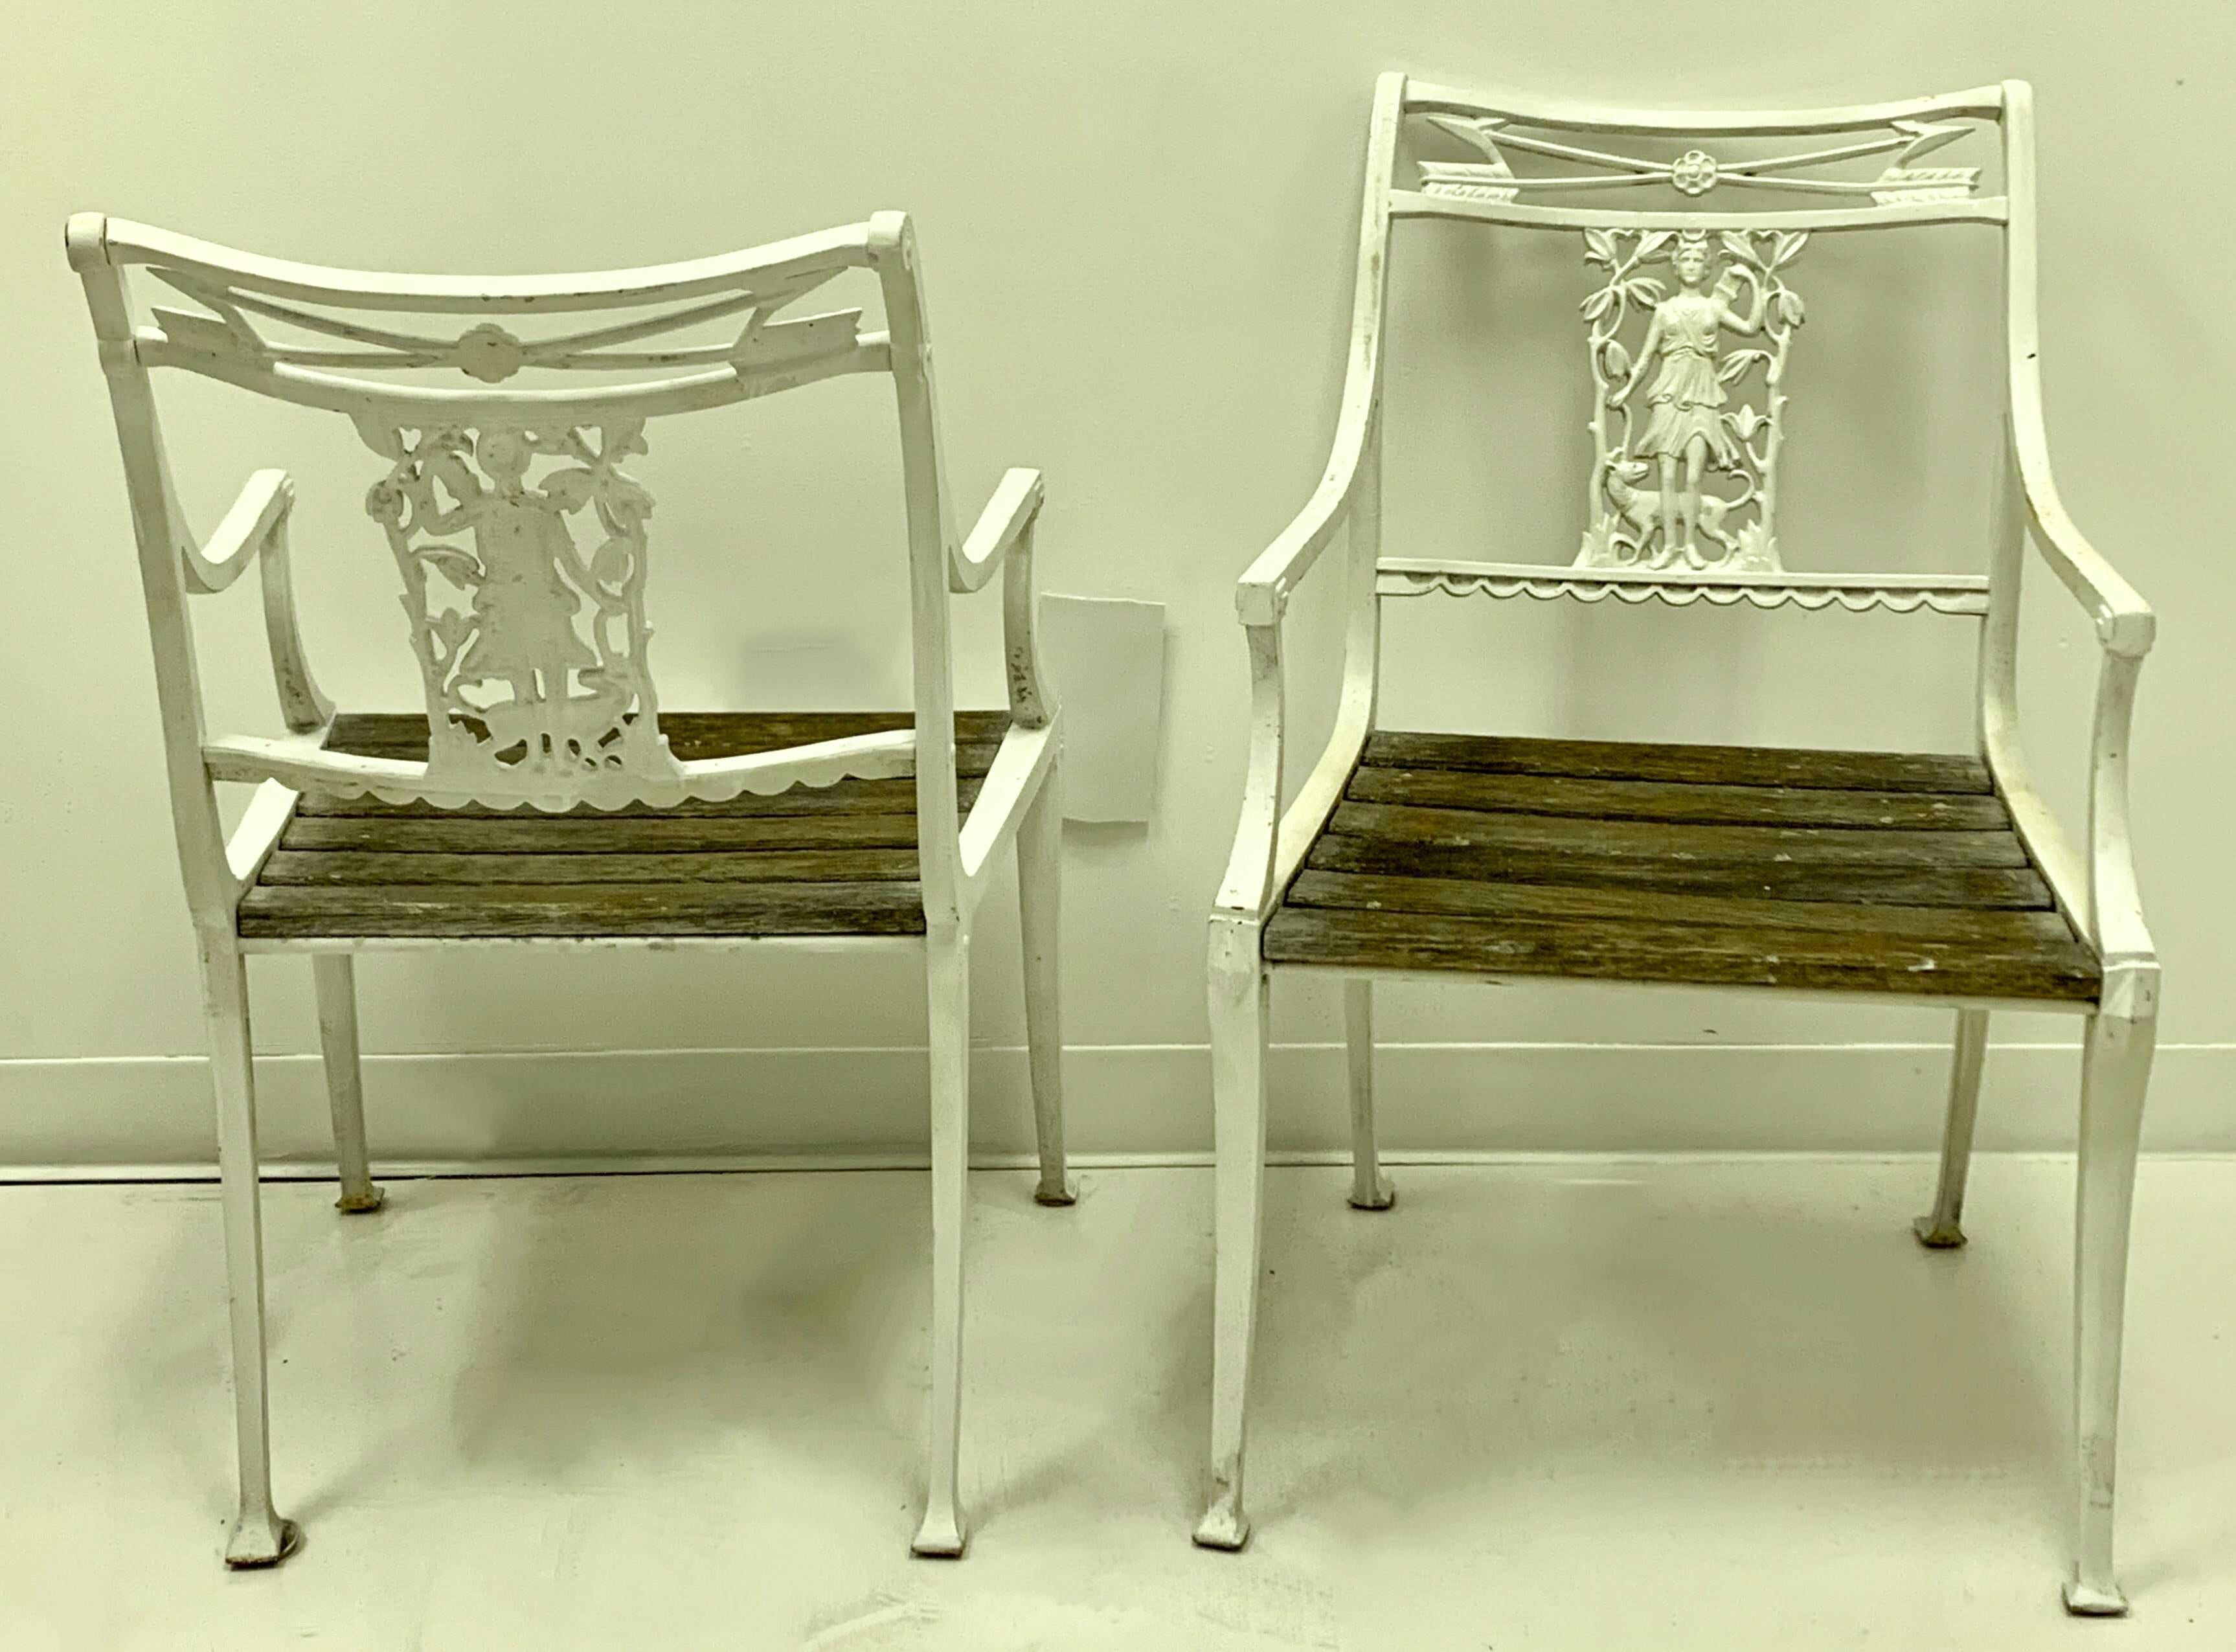 Early 20th Century Neoclassical Style Iron Molla Diana the Huntress Chairs, Pair For Sale 1